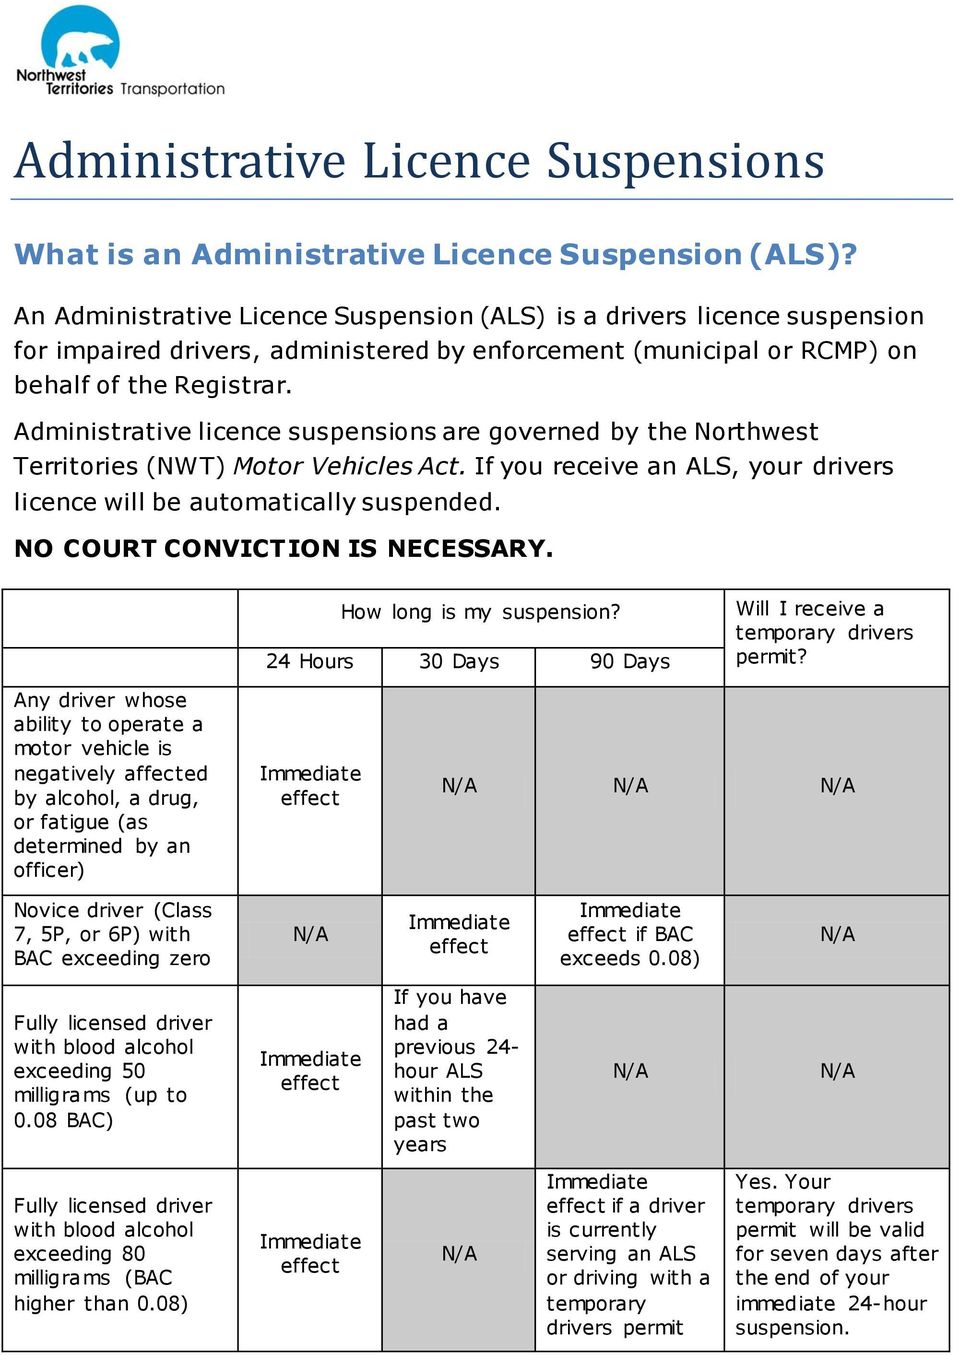 Administrative licence suspensions are governed by the Northwest Territories (NWT) Motor Vehicles Act. If you receive an ALS, your drivers licence will be automatically suspended.